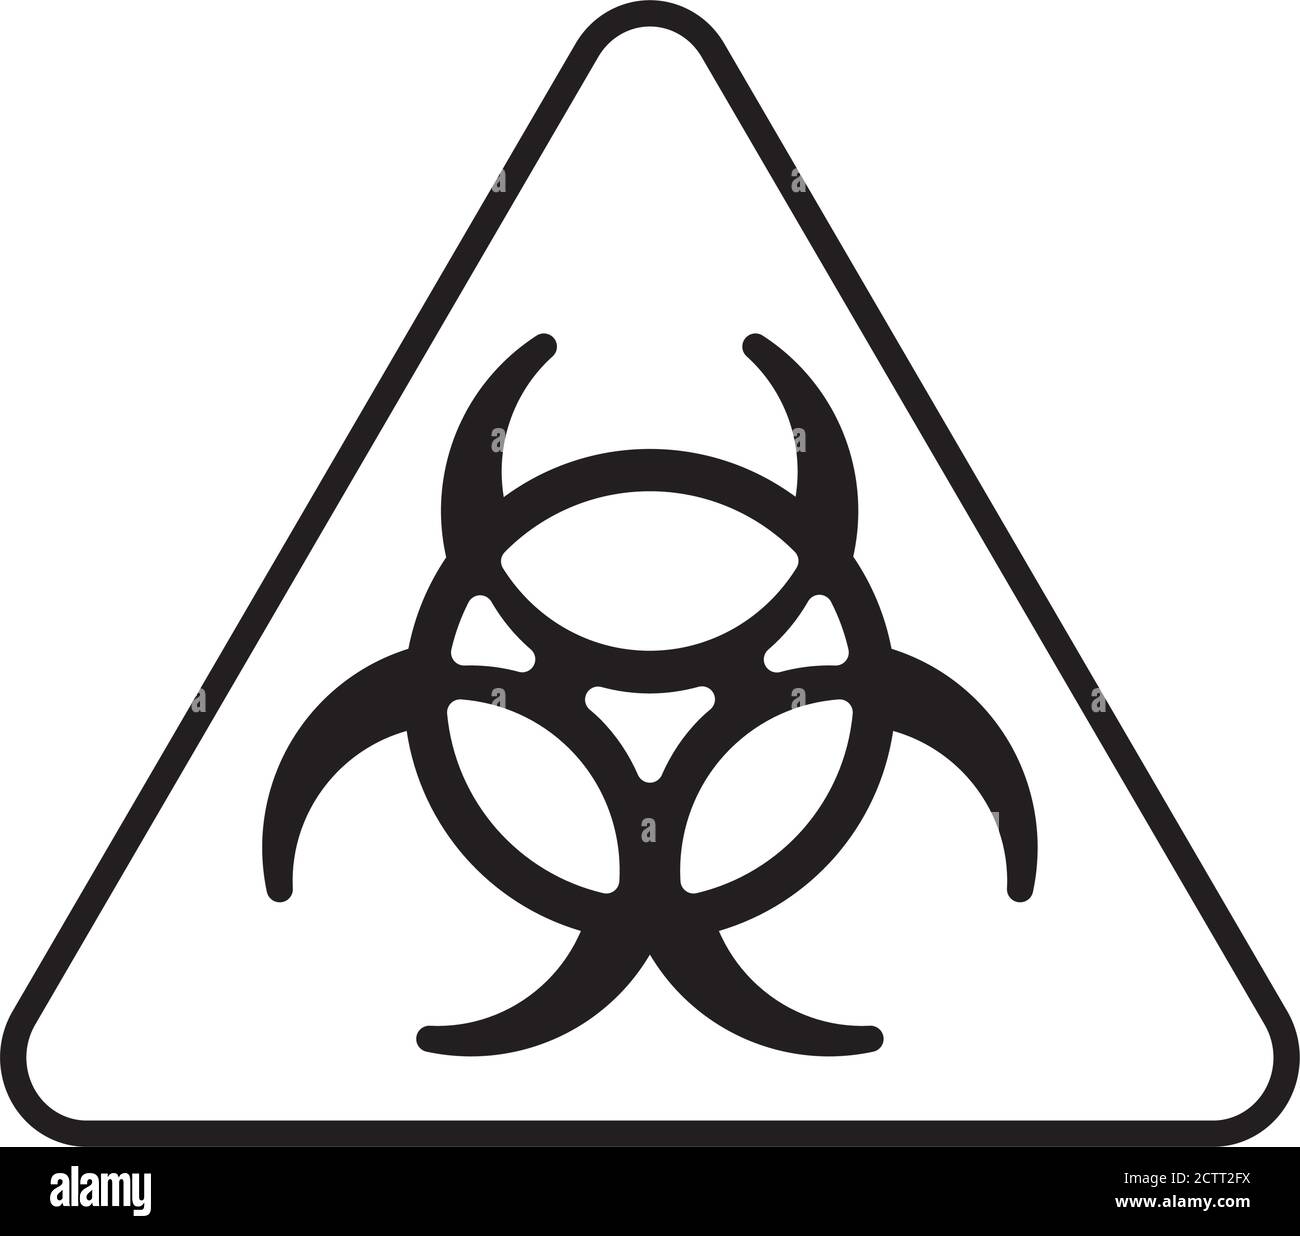 biohazard sign symbol icon over white background, line style, vector illustration Stock Vector